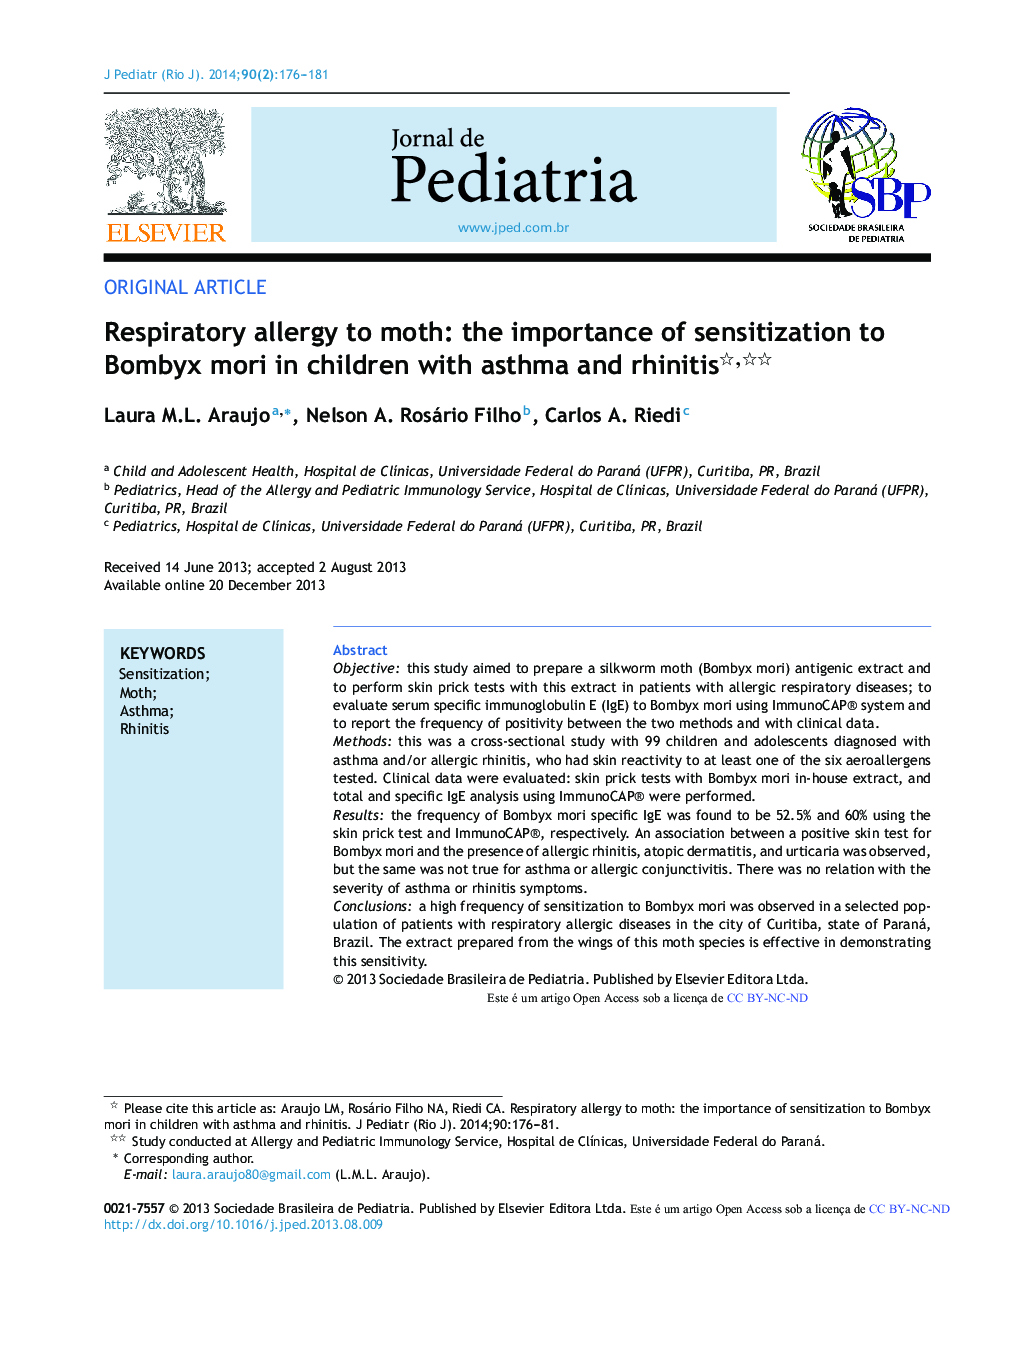 Respiratory allergy to moth: the importance of sensitization to Bombyx mori in children with asthma and rhinitis 